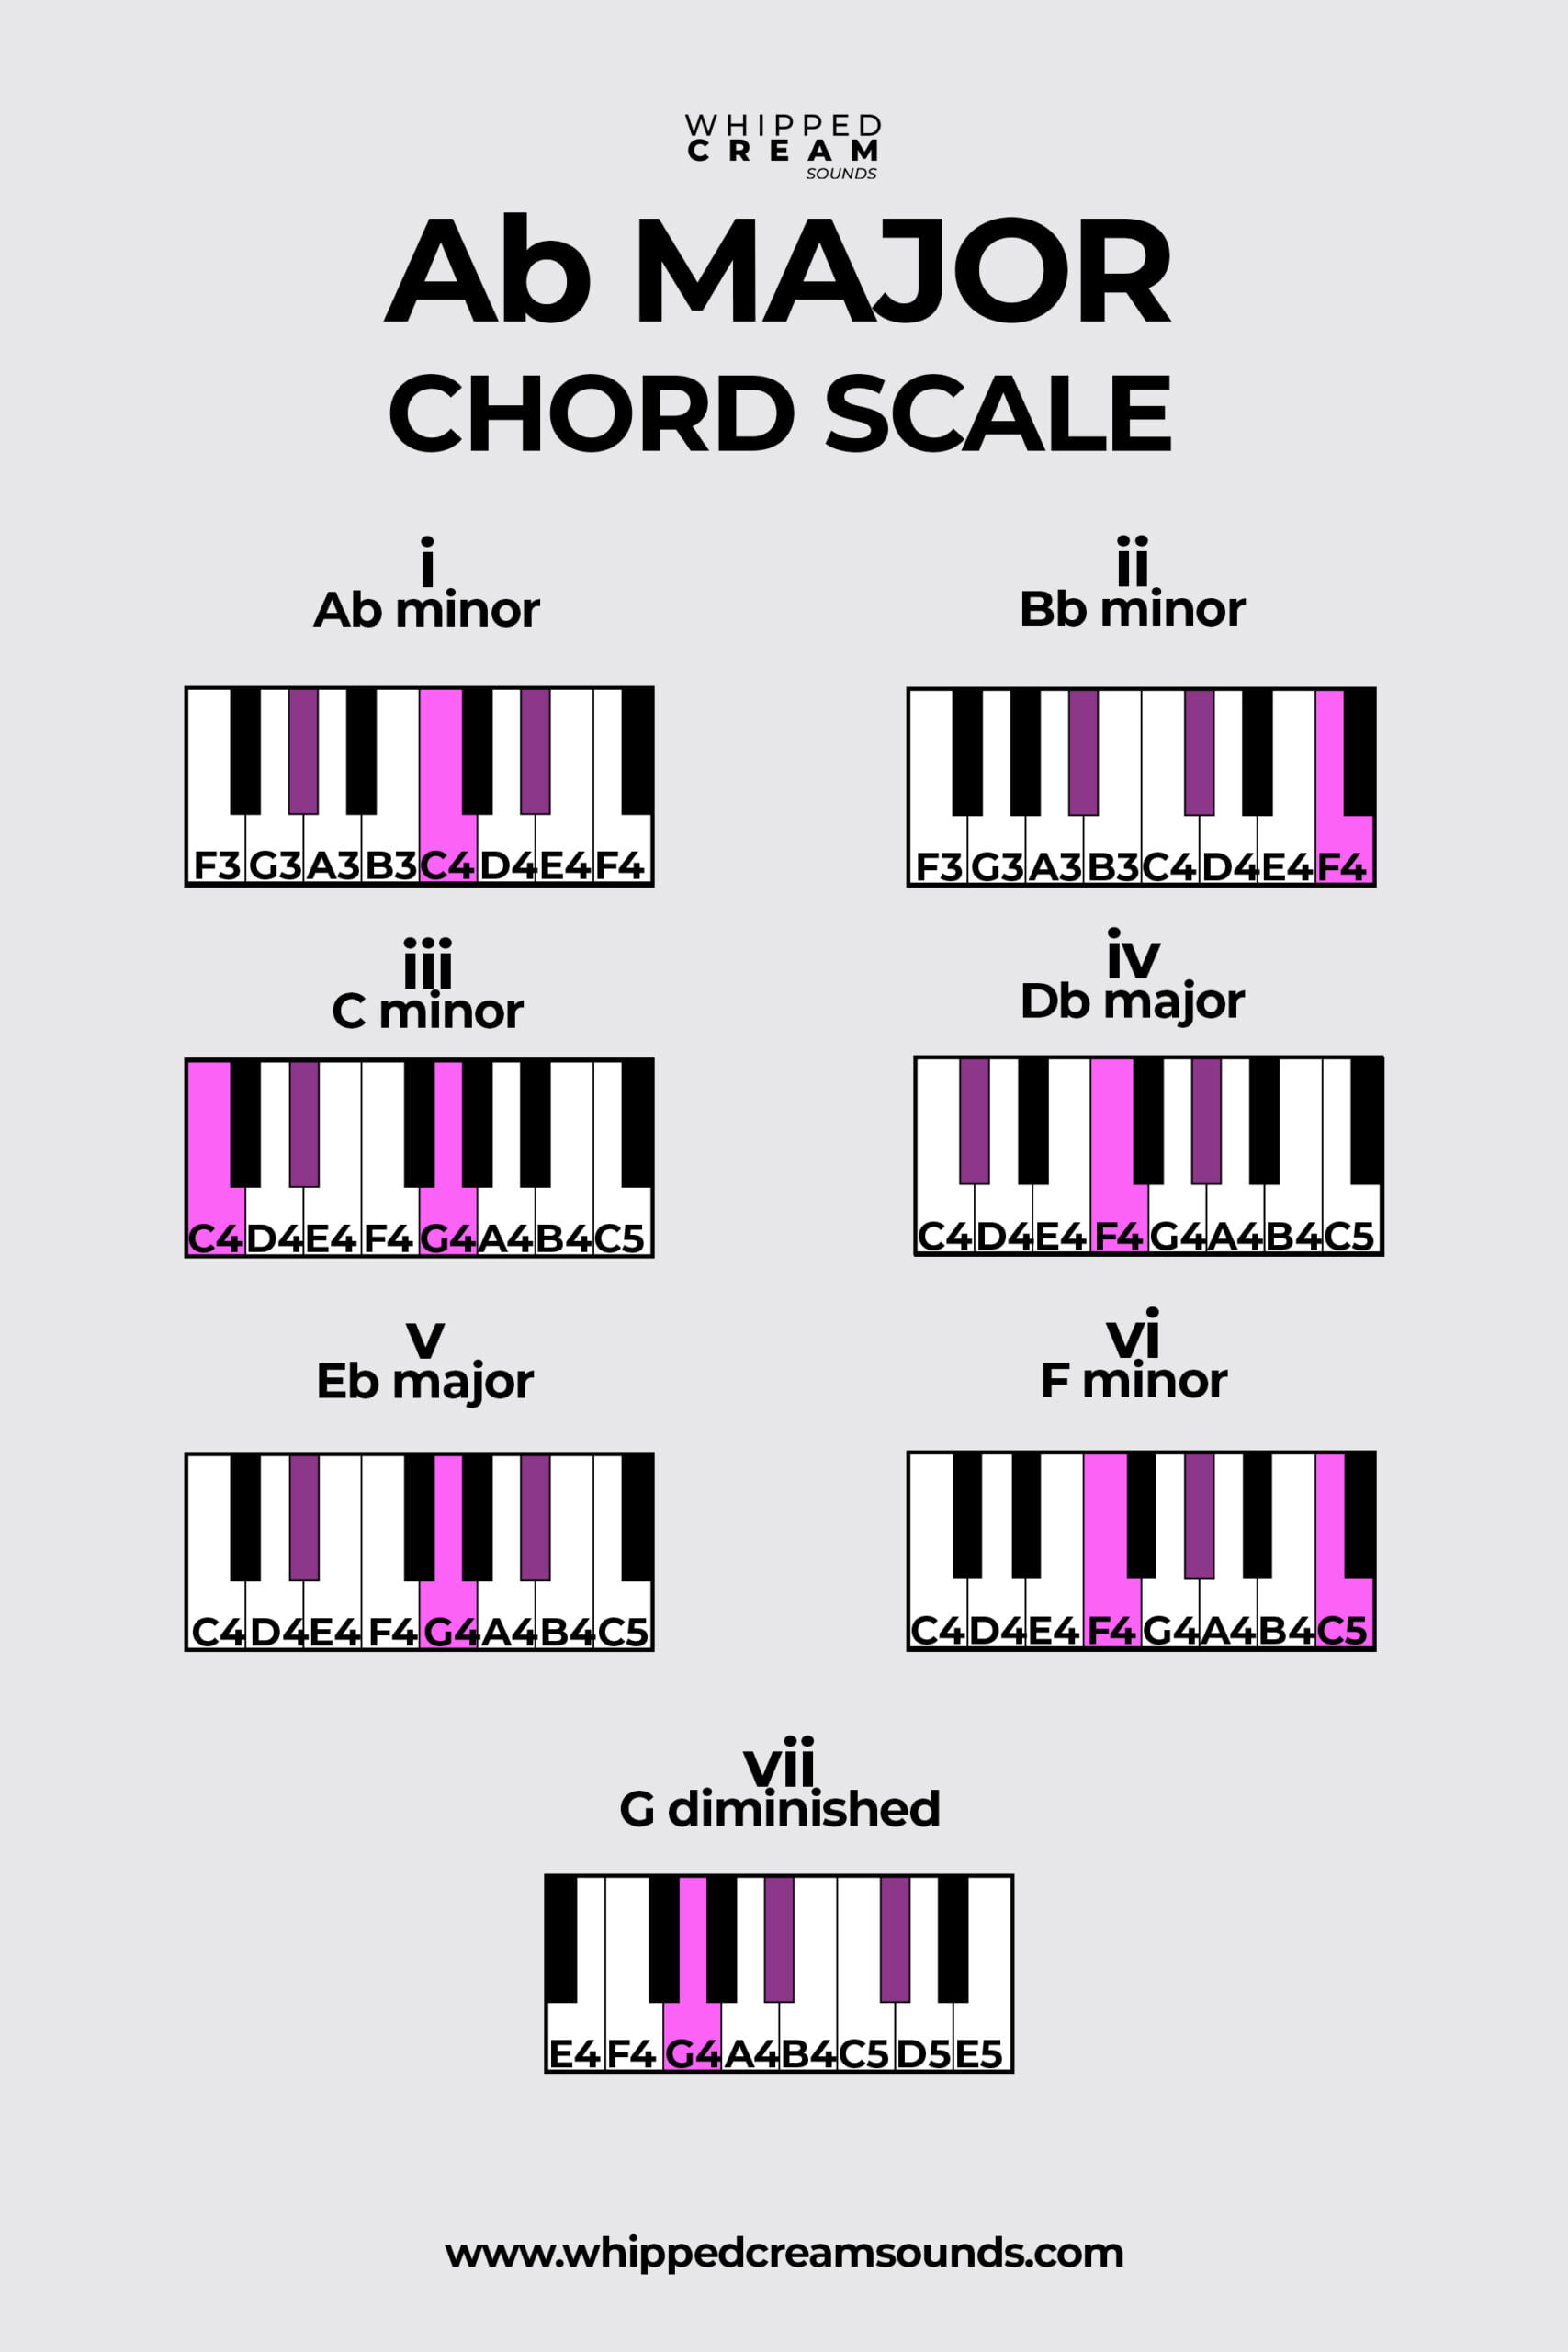 Ab Major Chord Scale, Chords in The Key of A Flat Major